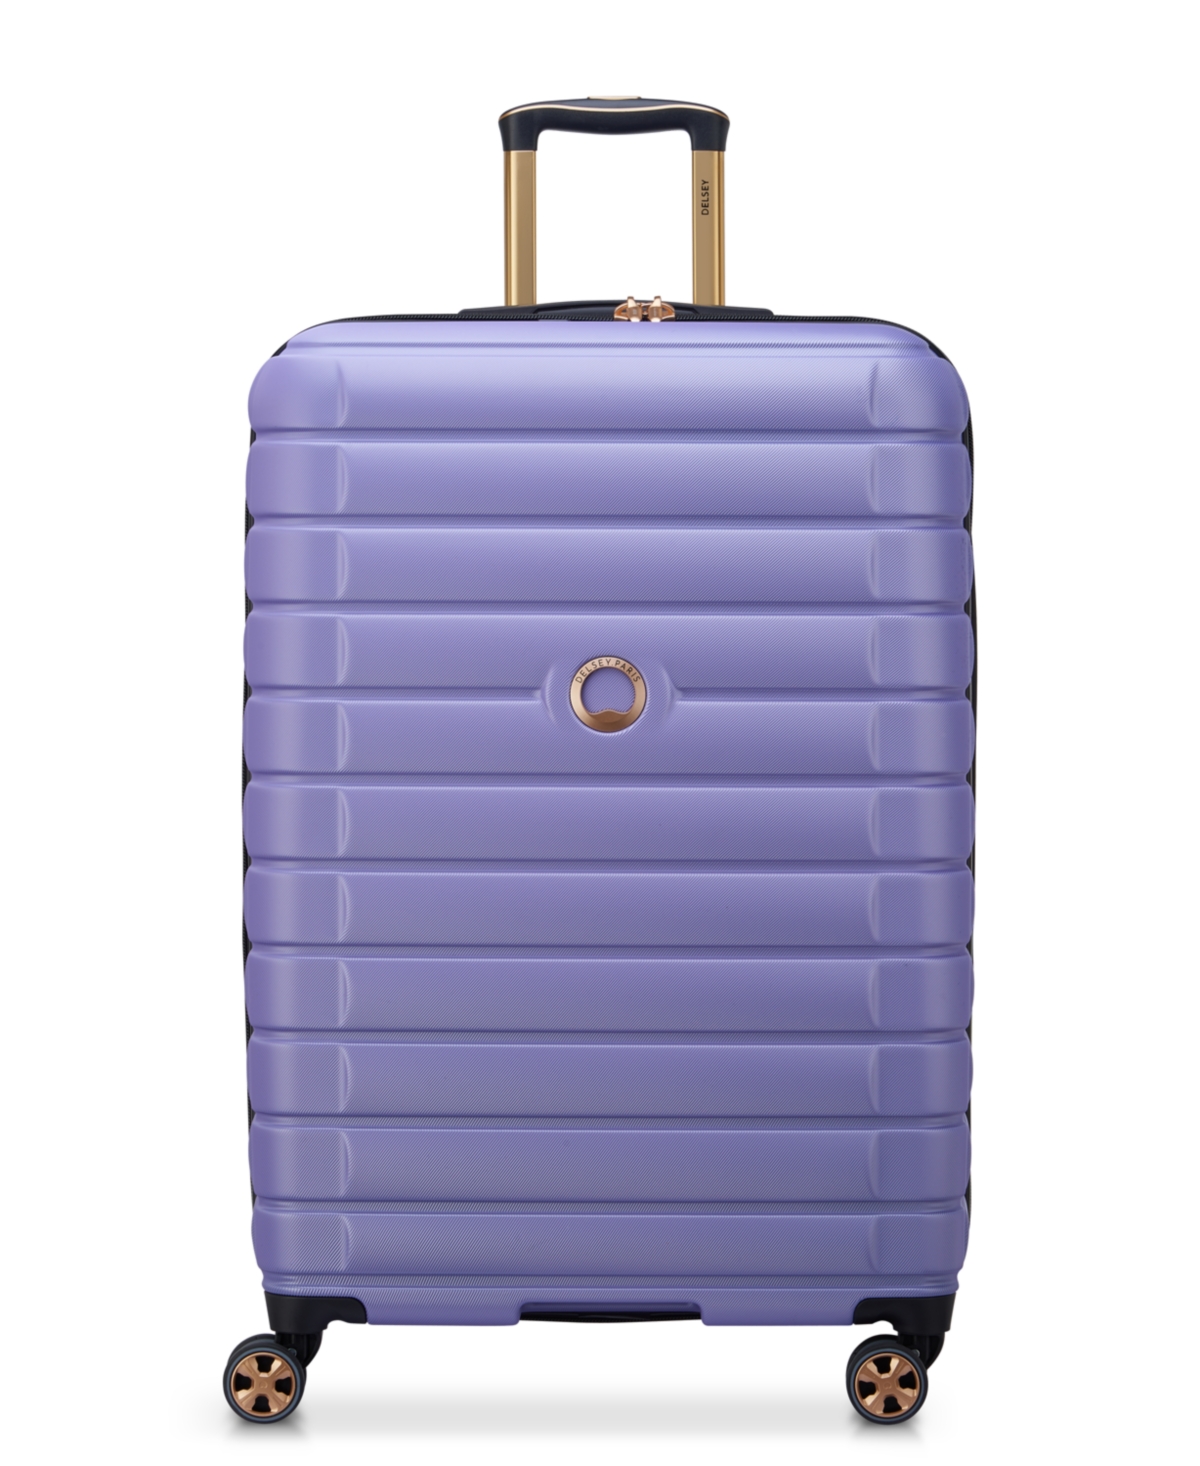 Shadow 5.0 Expandable 27" Check-in Spinner Luggage - Lilac